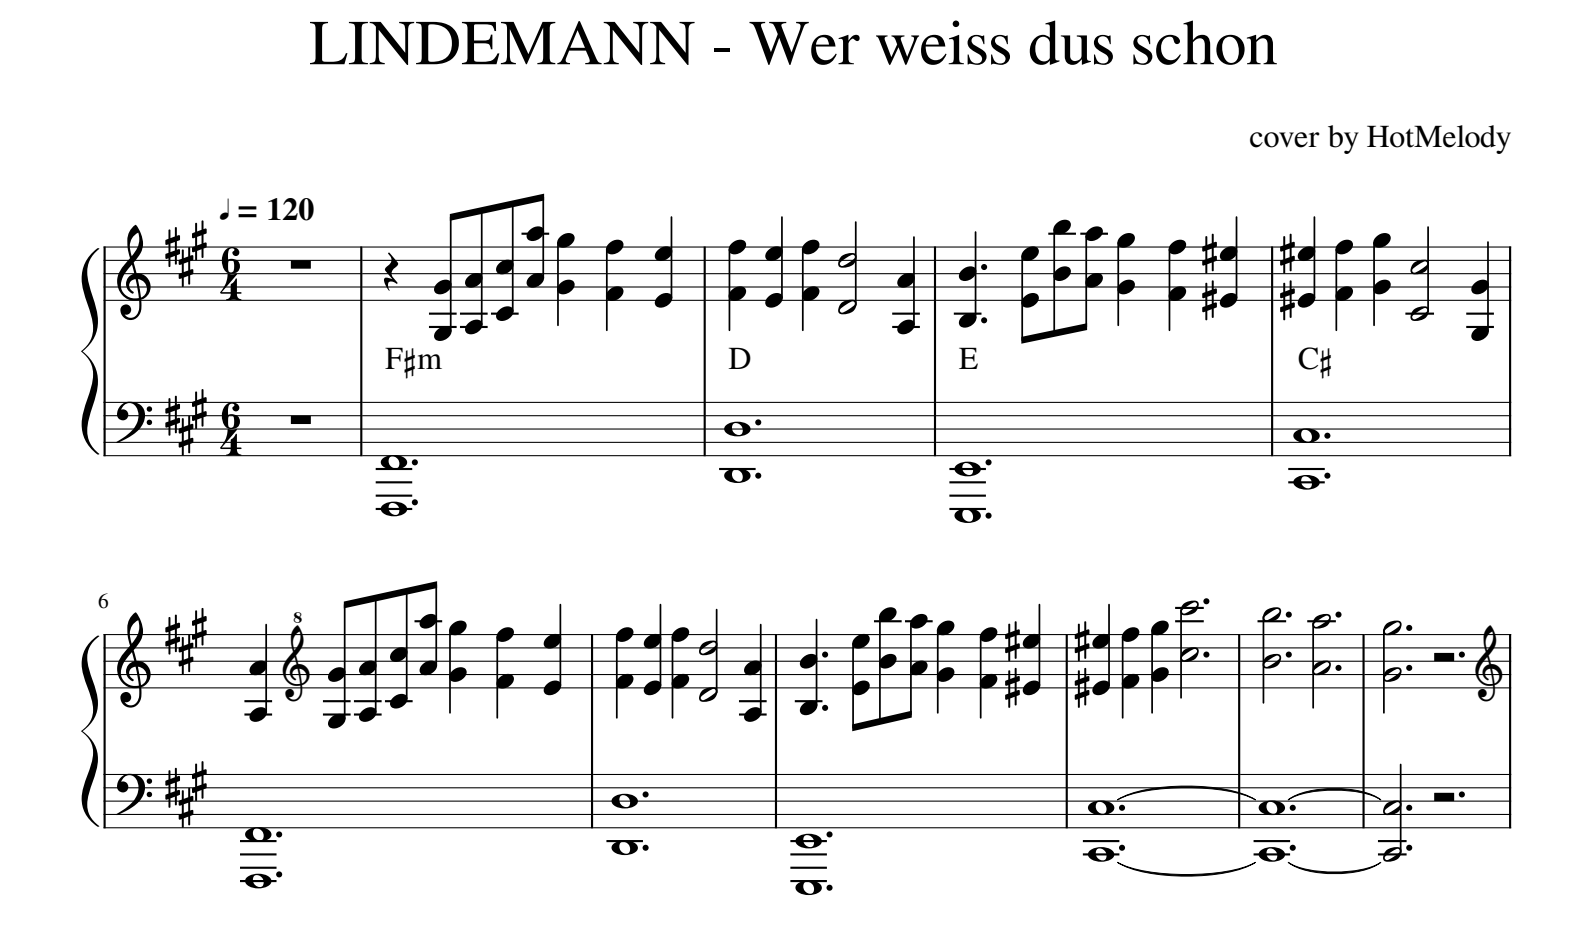 Wer Weiß Das Schon for piano Sheet music and midi files for piano. 